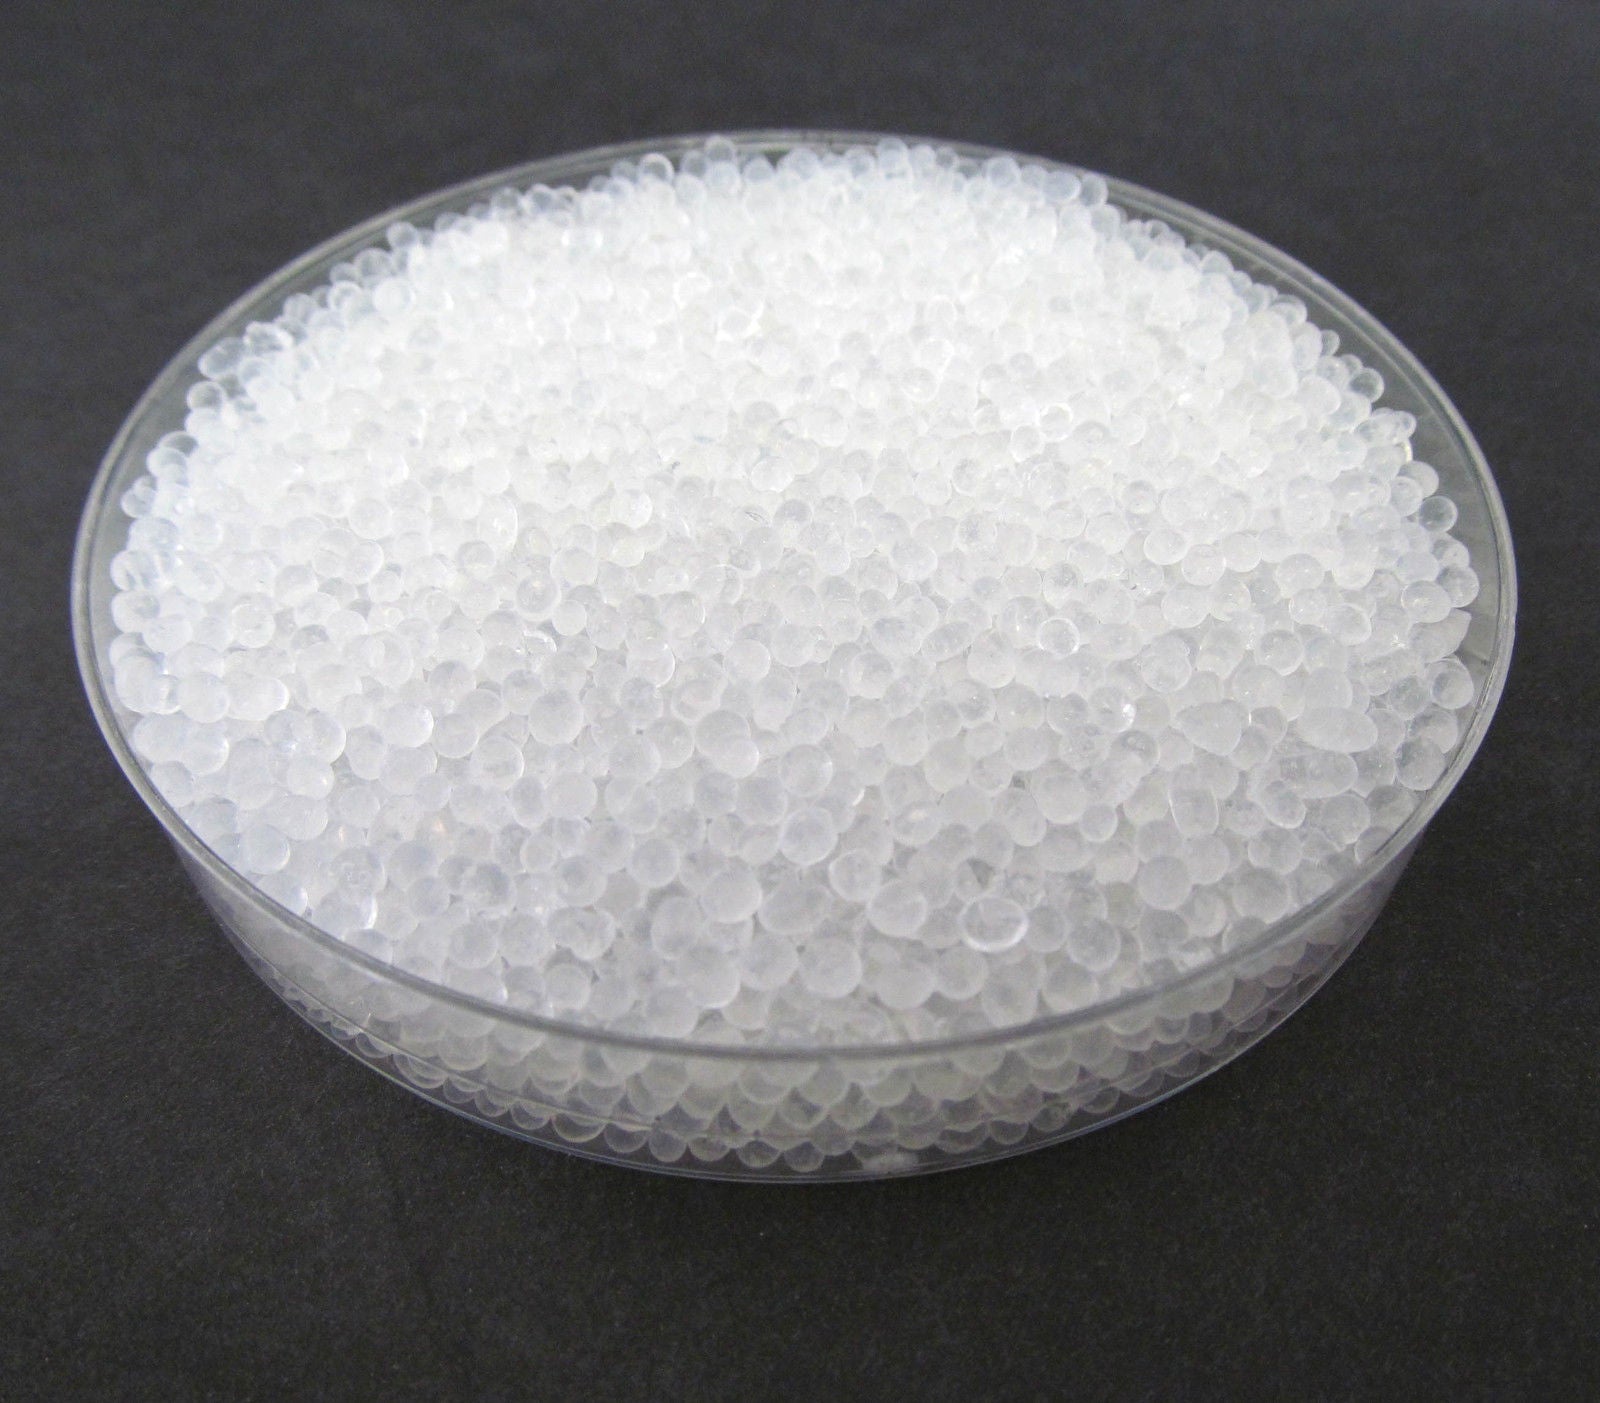 1 Quart(2 LBS) Premium White Silica Gel Beads - Rechargeable Pure & Safe Desiccant Beads